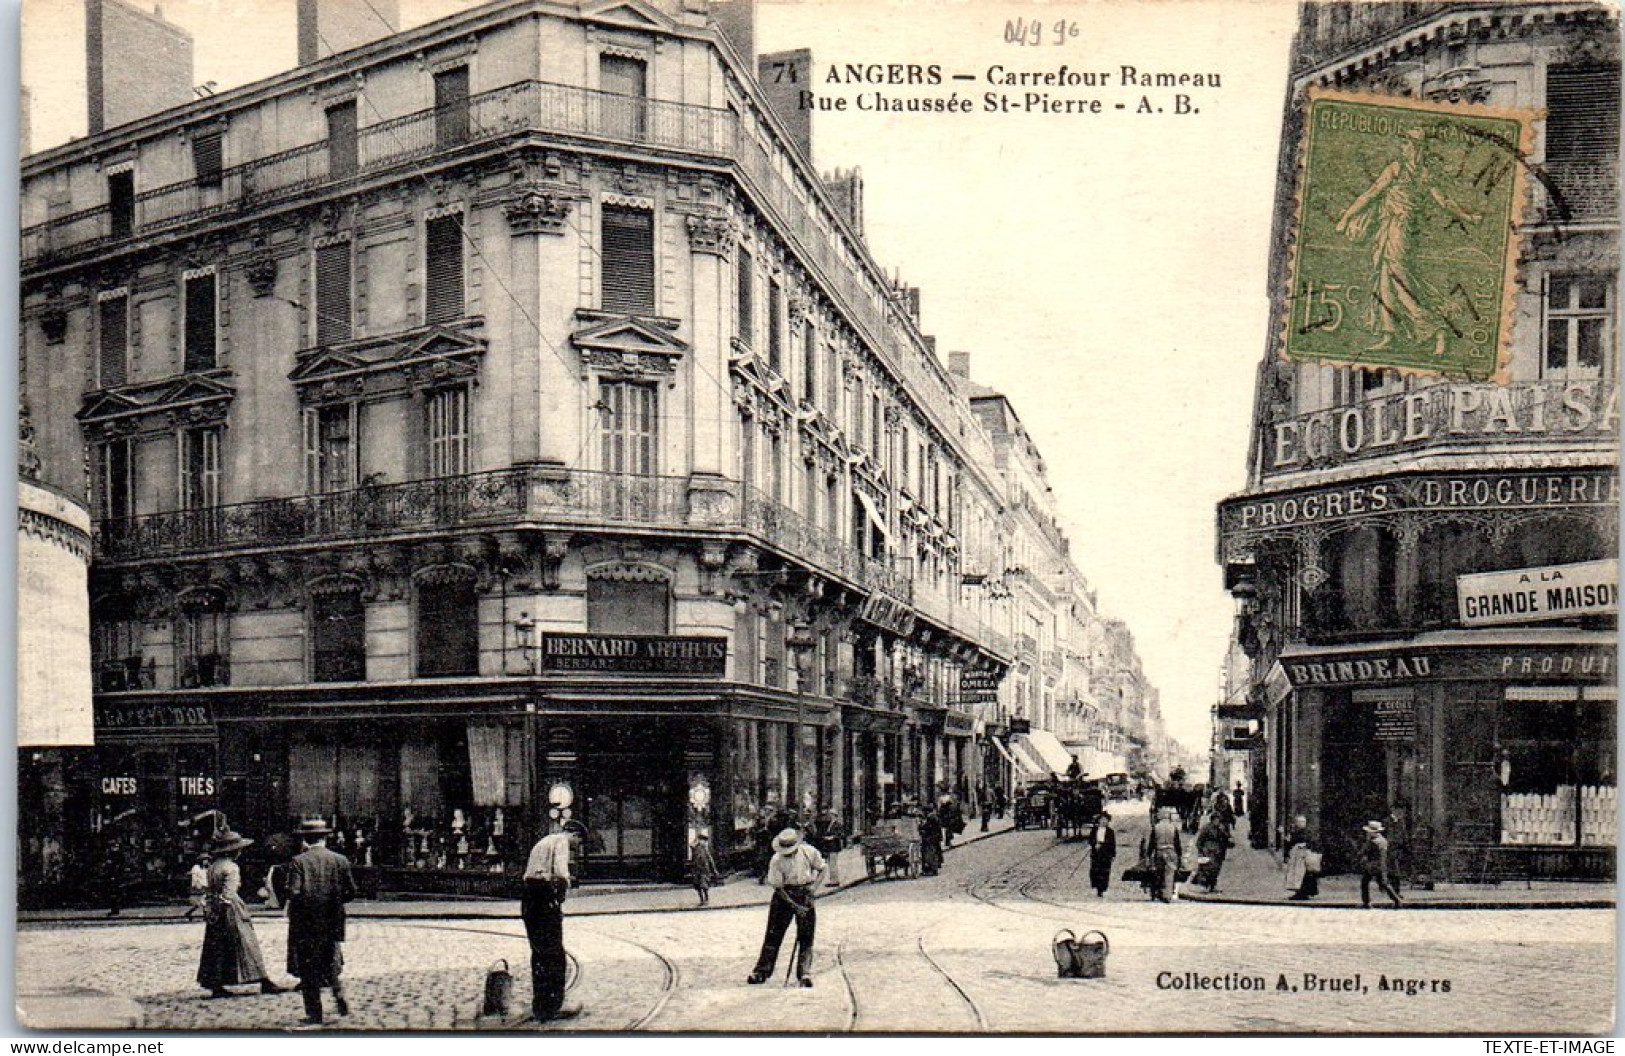 49 ANGERS - Carrefour Rameau, Rue Chaussee Saint Pierre. - Angers